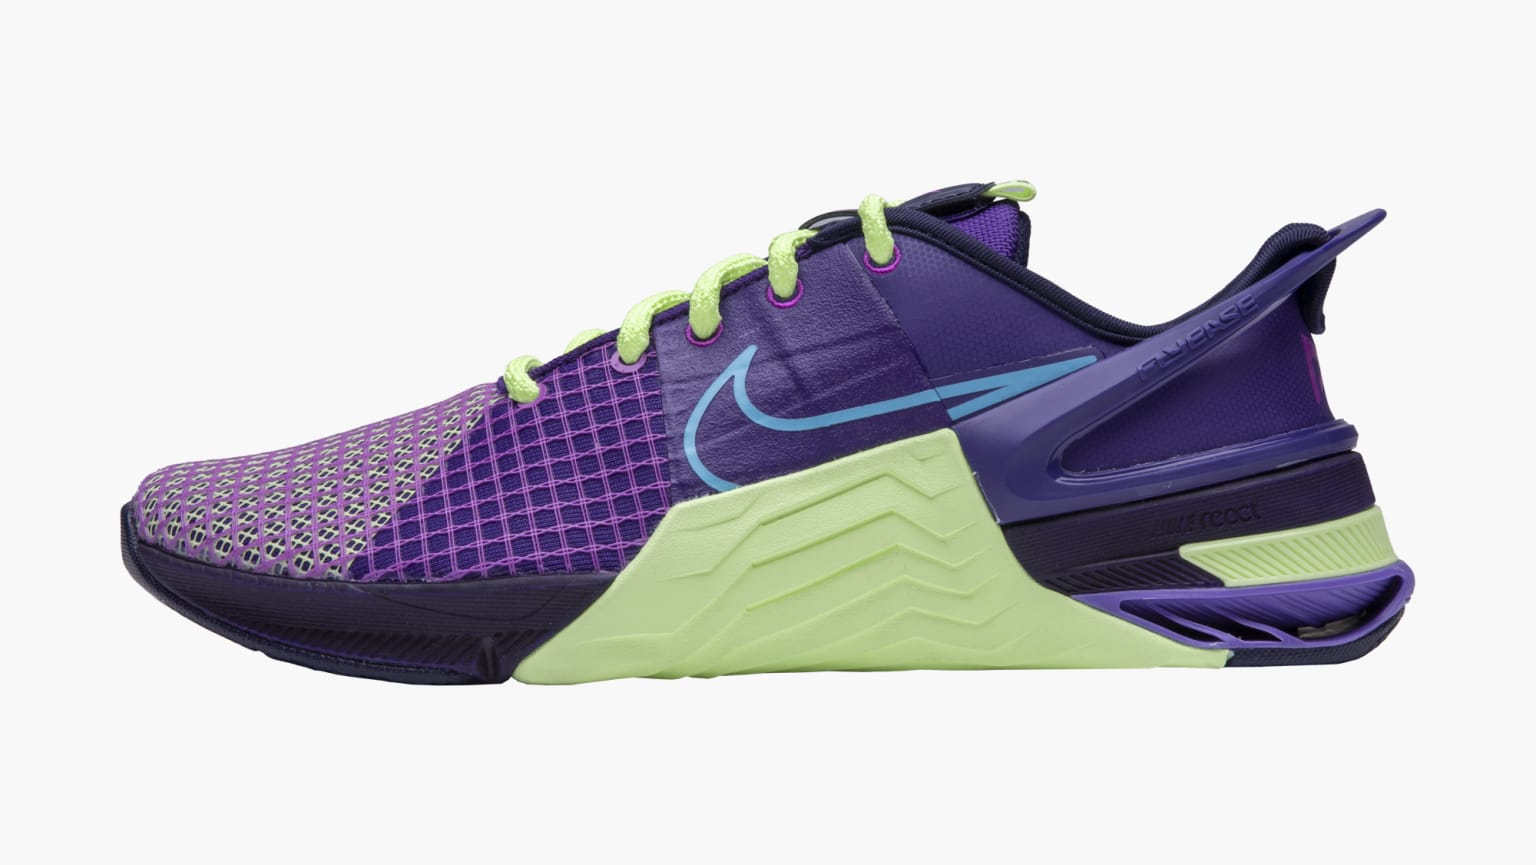 Nike Metcon 8 Flyease AMP - Men's - Court Purple / Baltic Blue Barely Volt | Fitness